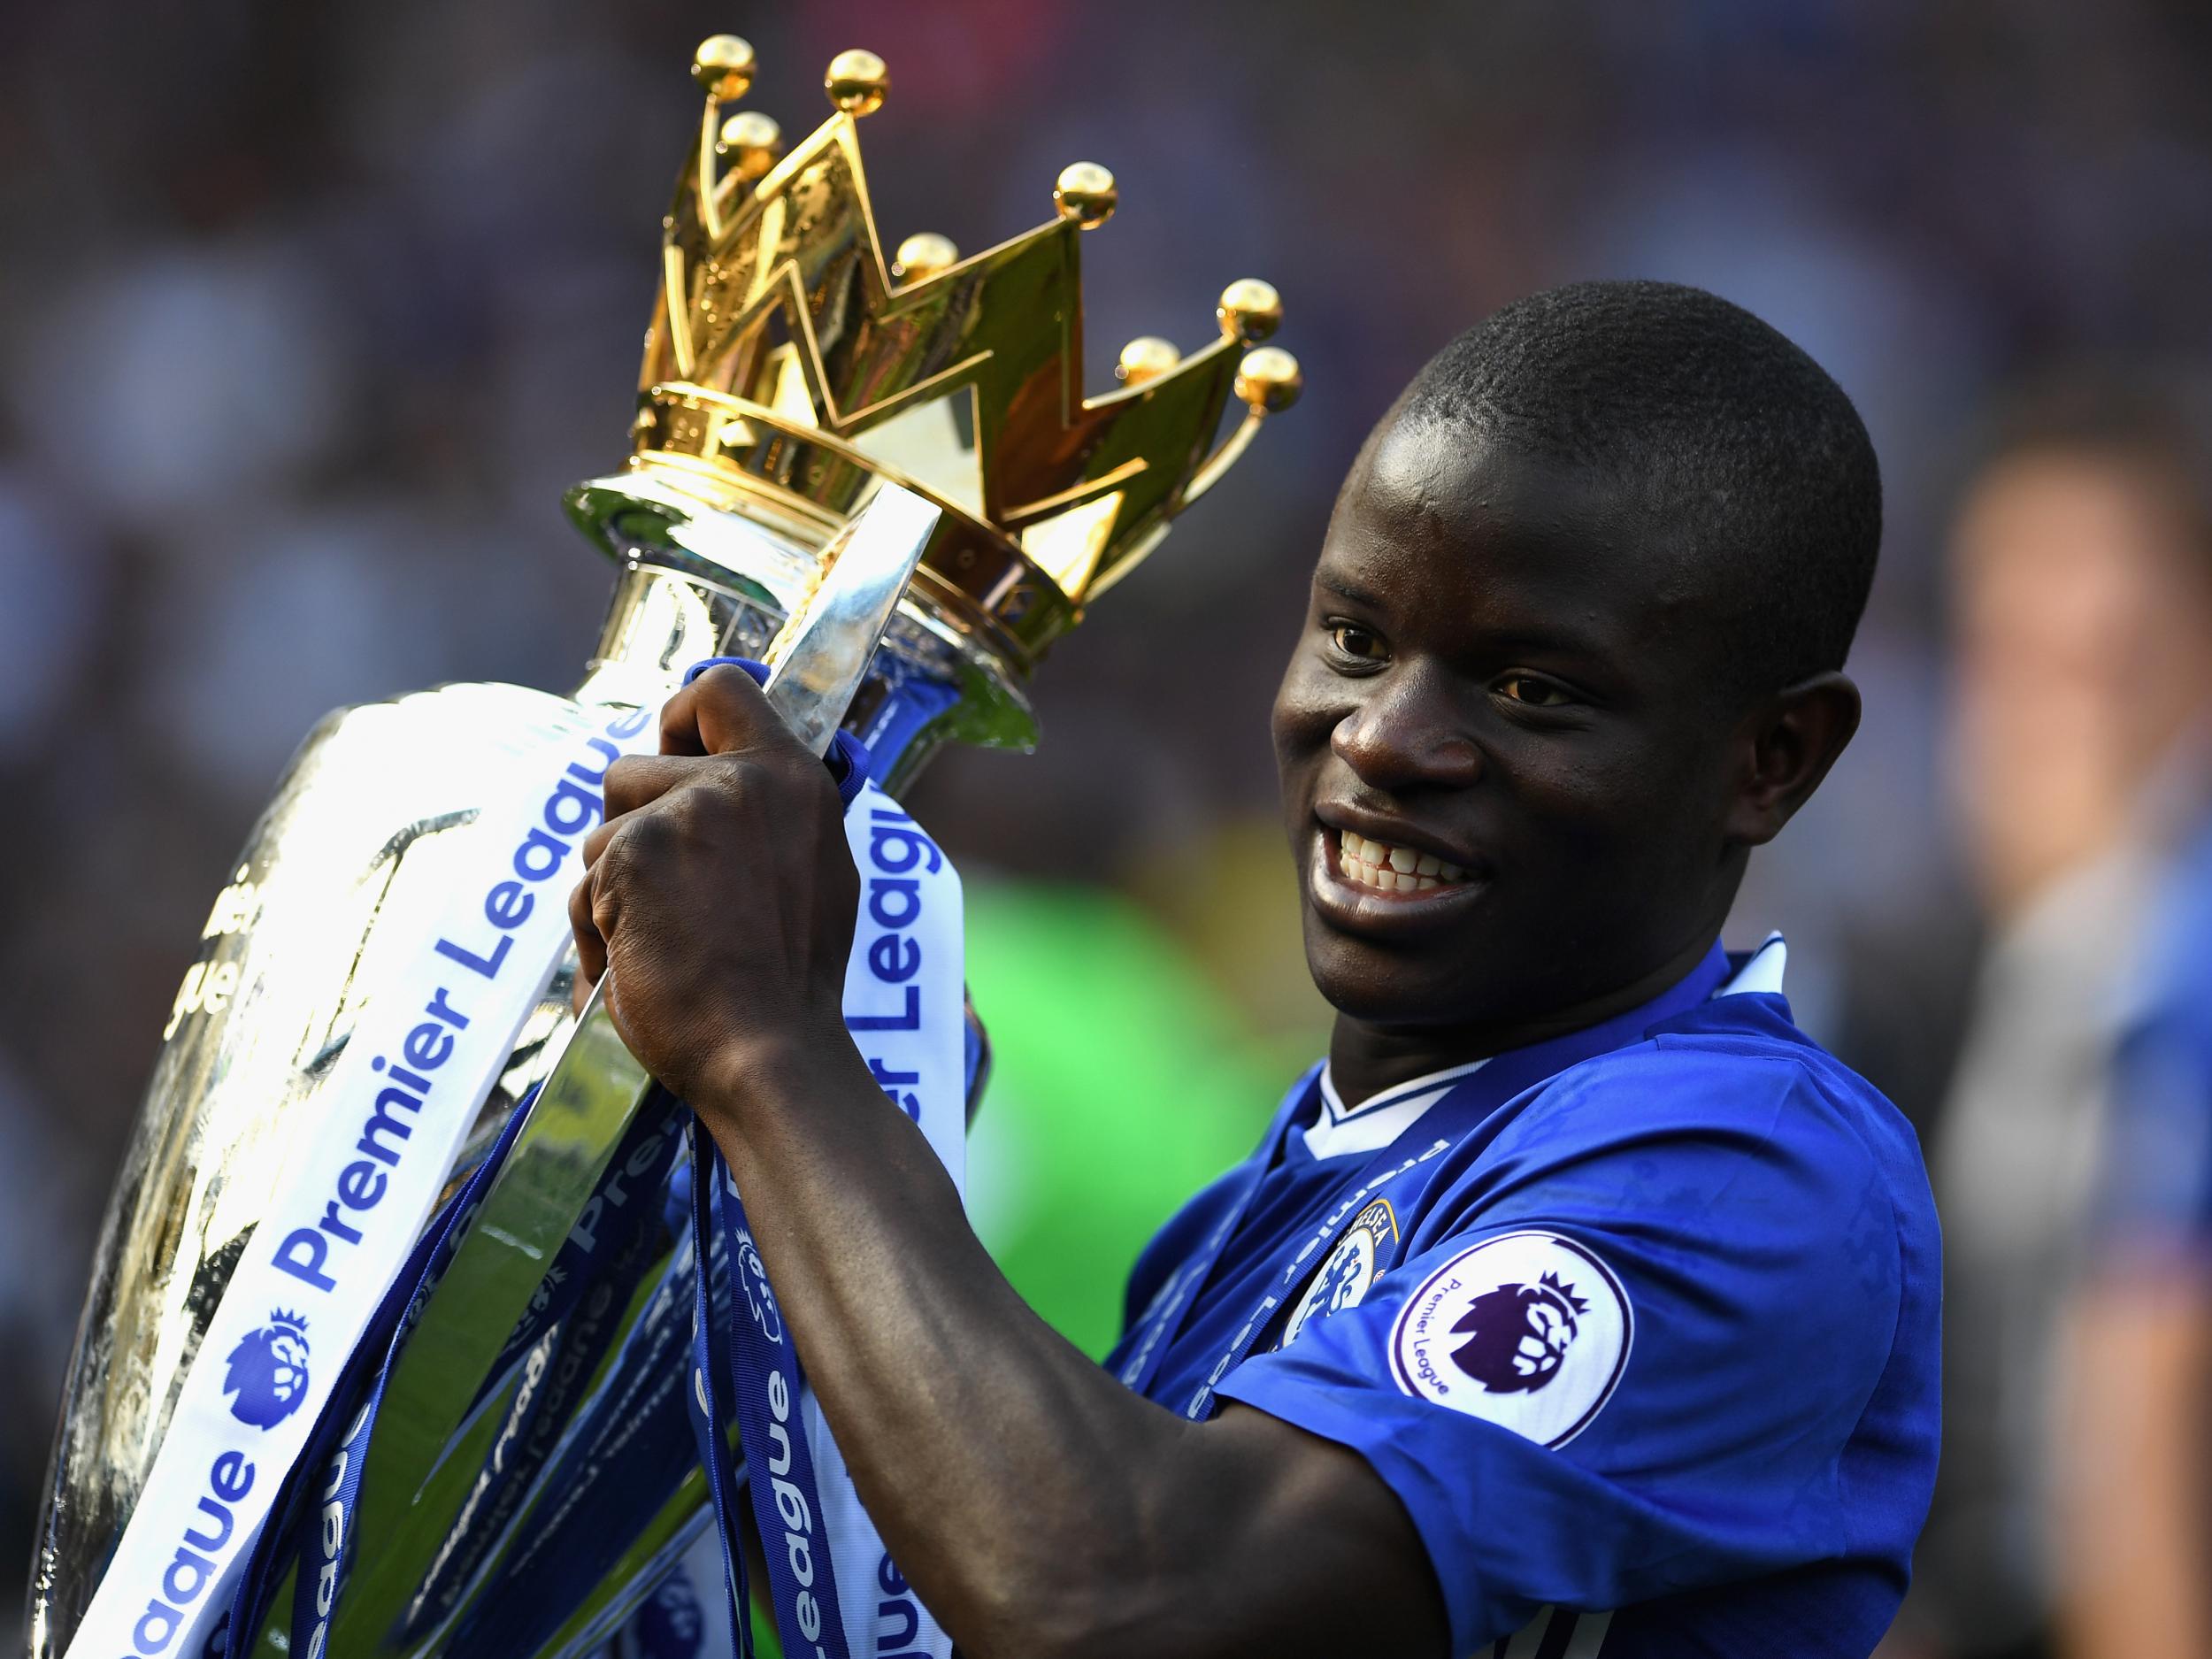 Kante was integral in Chelsea's successful title campaign